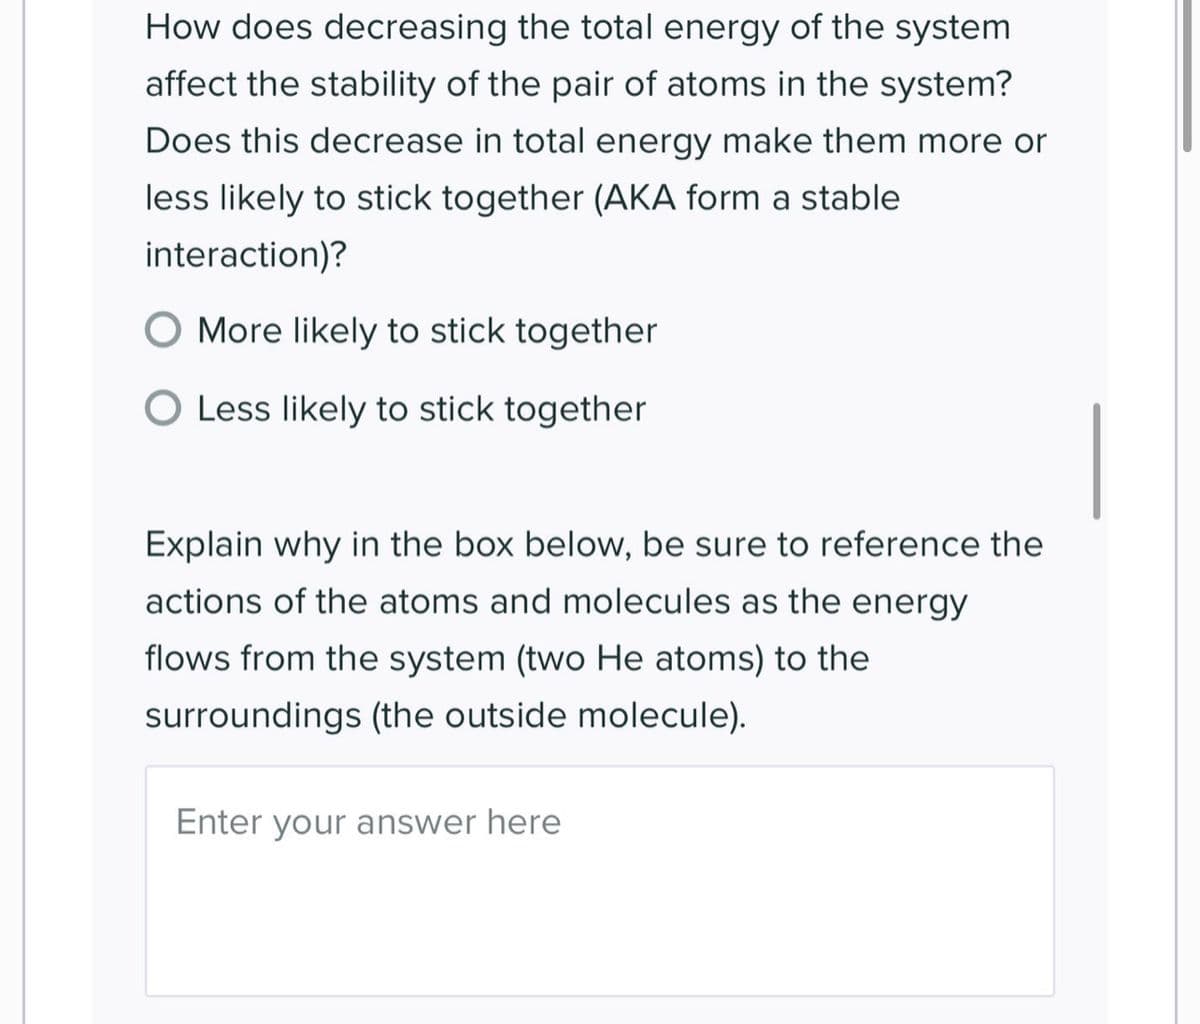 How does decreasing the total energy of the system
affect the stability of the pair of atoms in the system?
Does this decrease in total energy make them more or
less likely to stick together (AKA form a stable
interaction)?
More likely to stick together
O Less likely to stick together
Explain why in the box below, be sure to reference the
actions of the atoms and molecules as the energy
flows from the system (two He atoms) to the
surroundings (the outside molecule).
Enter your answer here